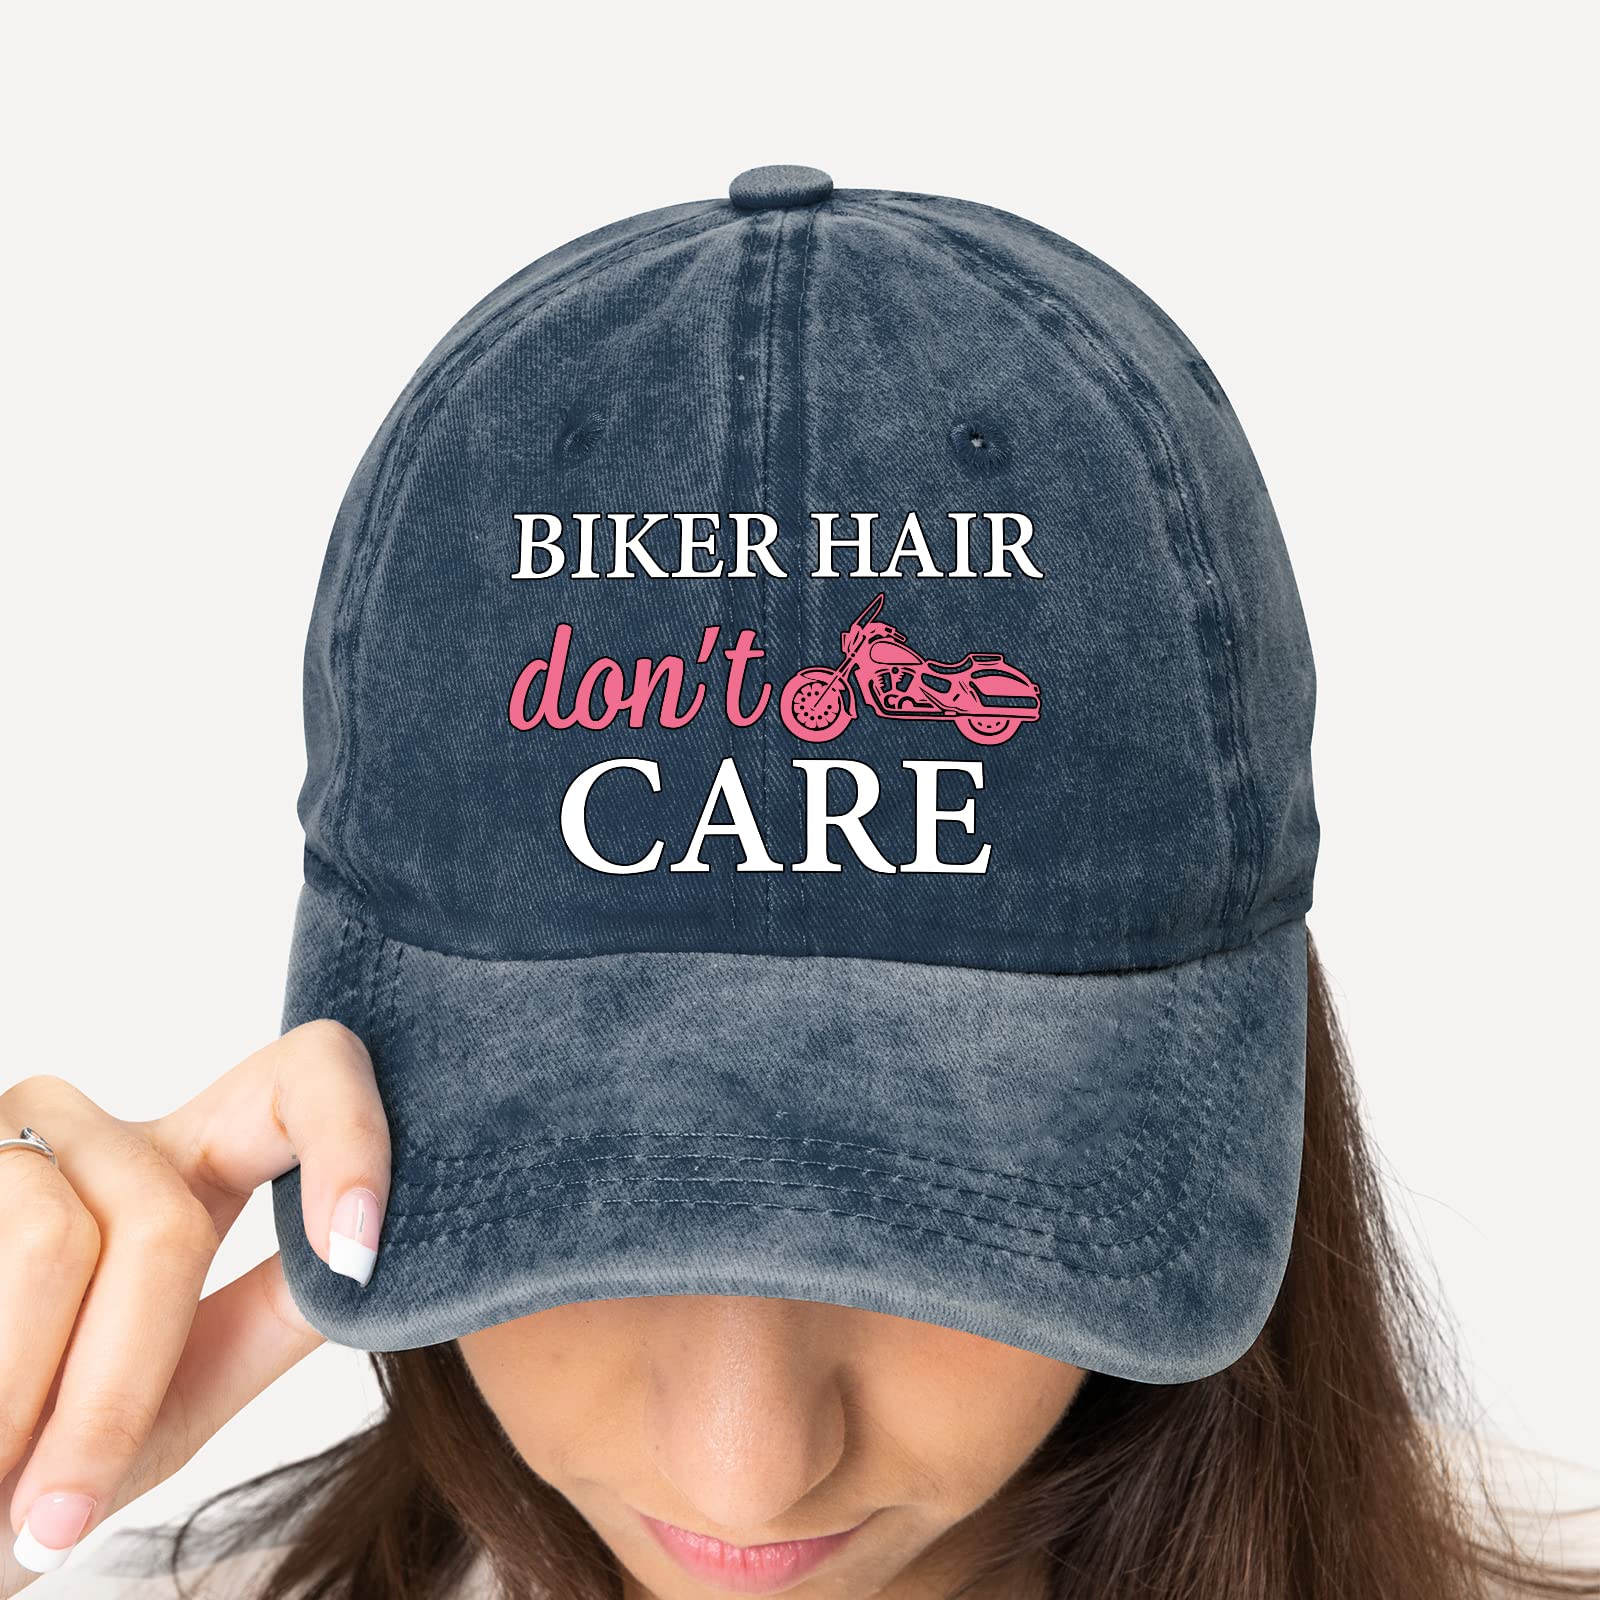 Pishovi Biker Hair Don't Care Distressed Washed Blue Baseball Cap, Vintage Adjustable Cotton Cap, Retirement Gift for Women, Biker Cap for Mom BFFF, Birthday for Motorcycle Enthusiast